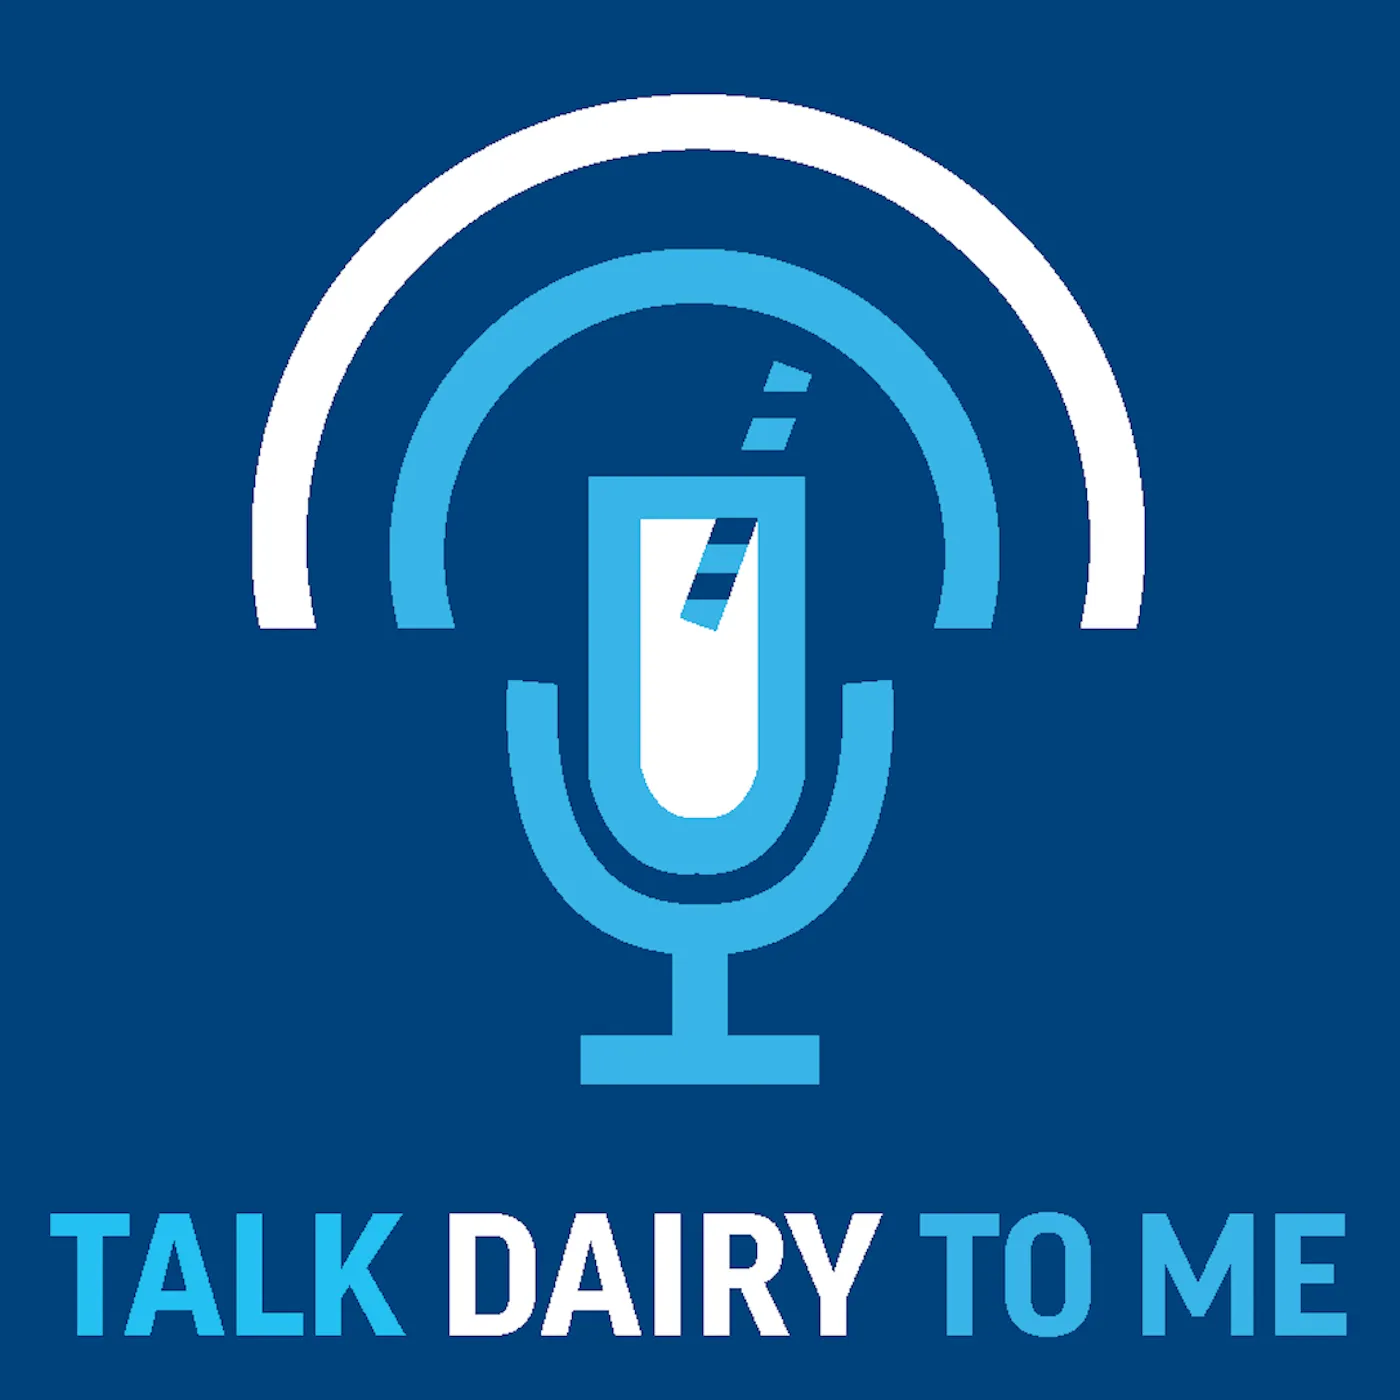 Dairy Farmers of America's Talk Dairy to Me Podcast